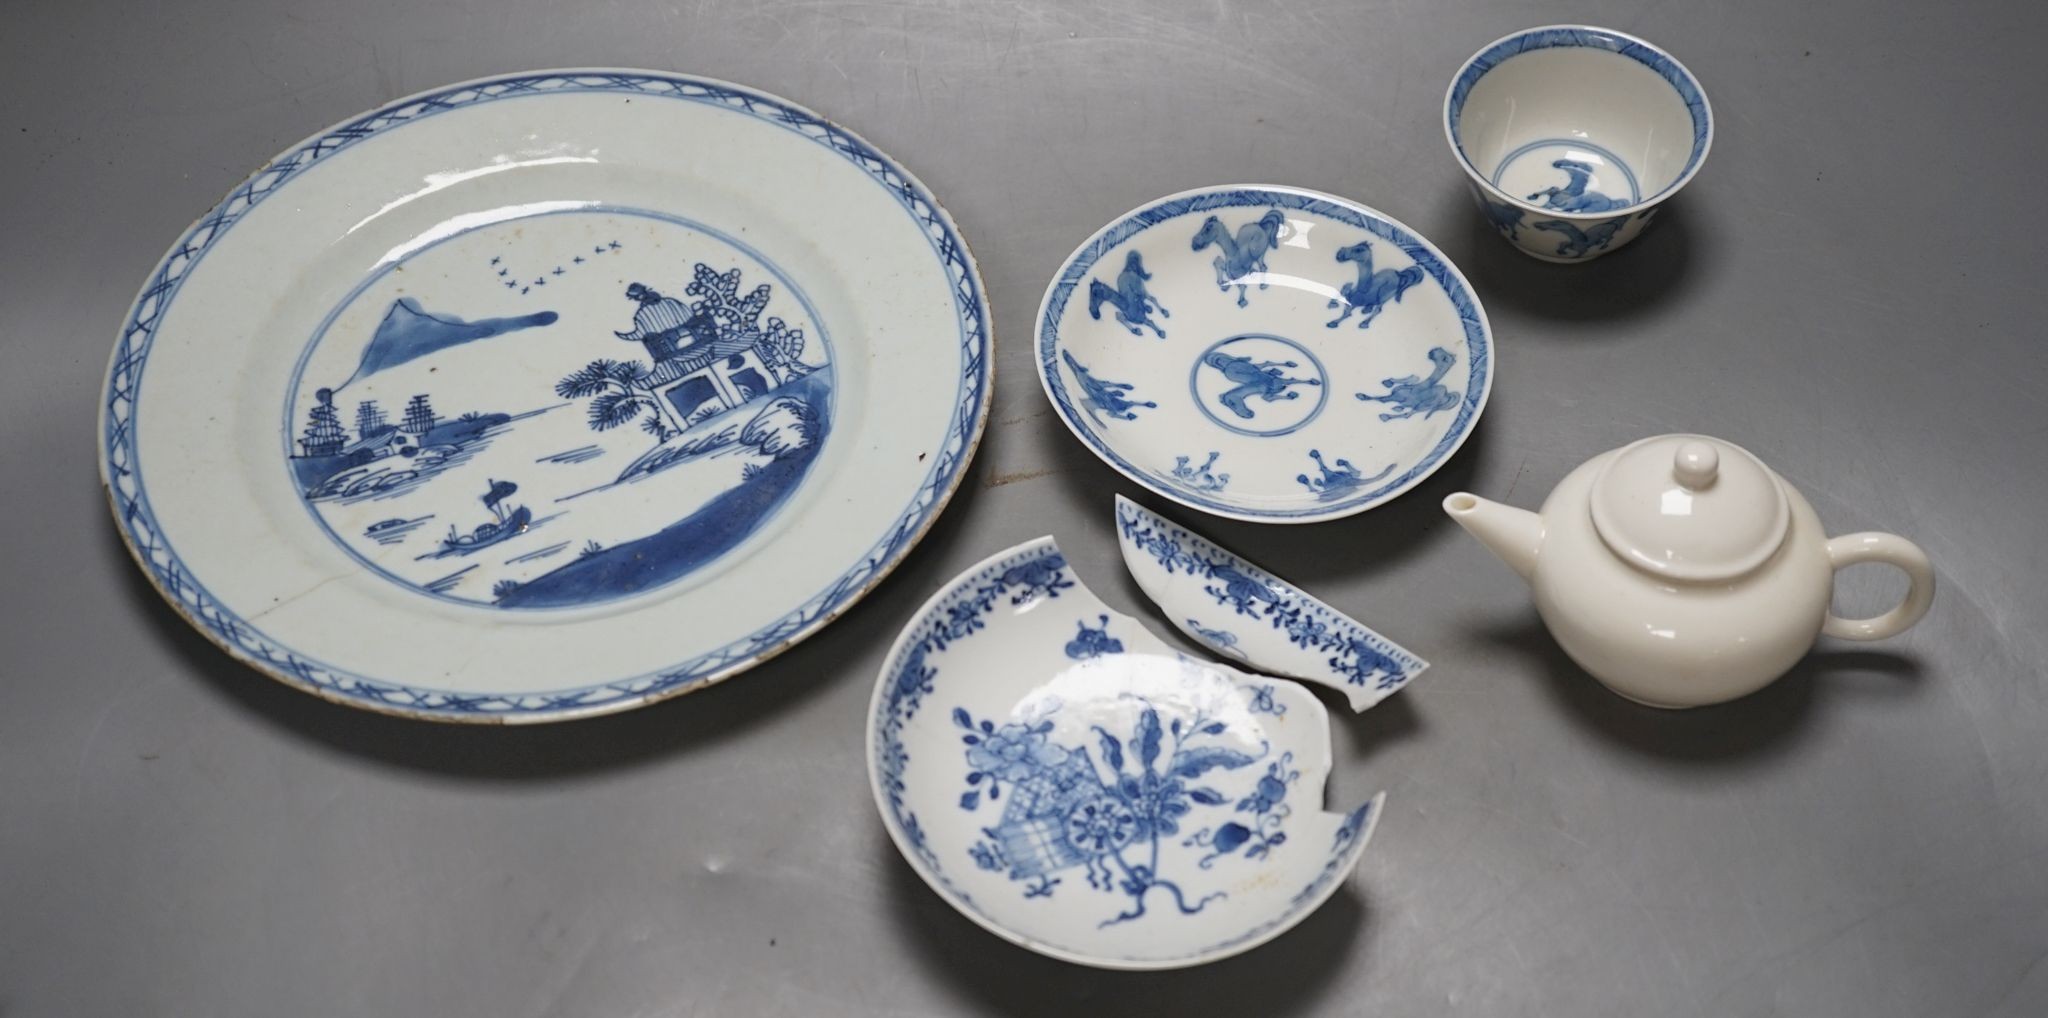 A Chinese blue and white plate, 23.5 cm, a similar tea bowl and saucer, a saucer and a white glaze teapot and cover, 18th century and later